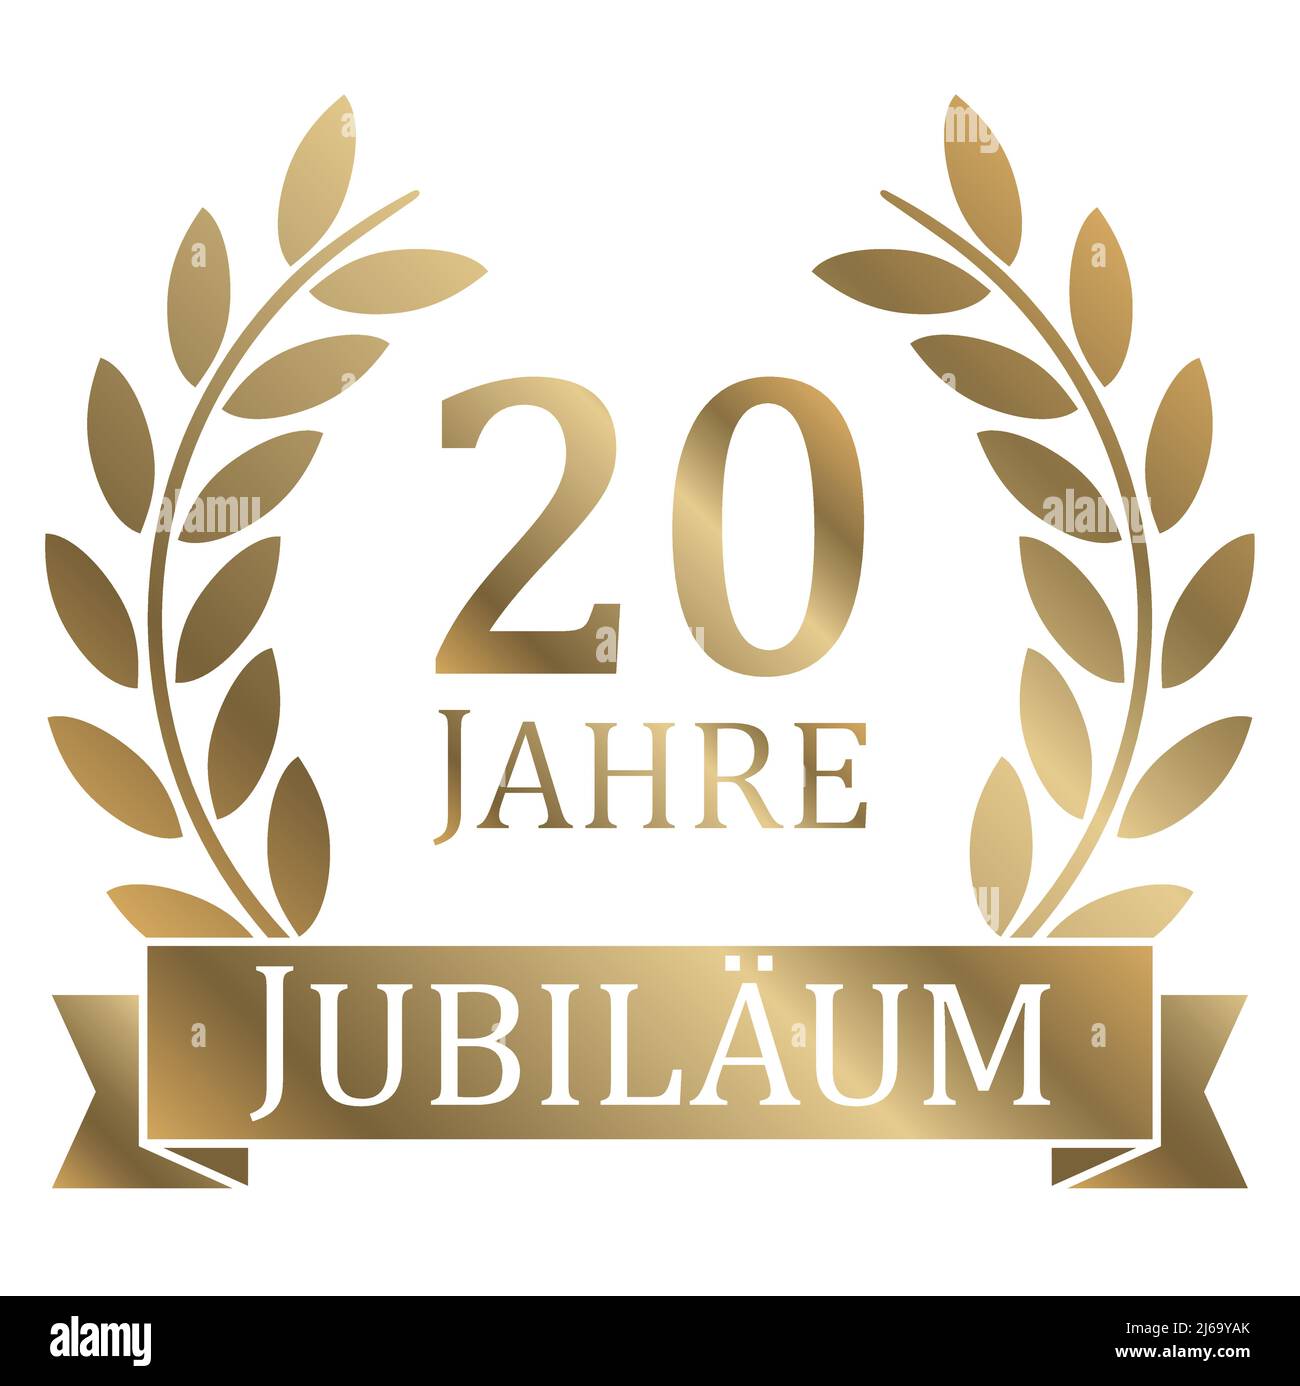 eps vector file with golden laurel wreath on white background for success or firm jubilee with text 20 years (german text) Stock Vector